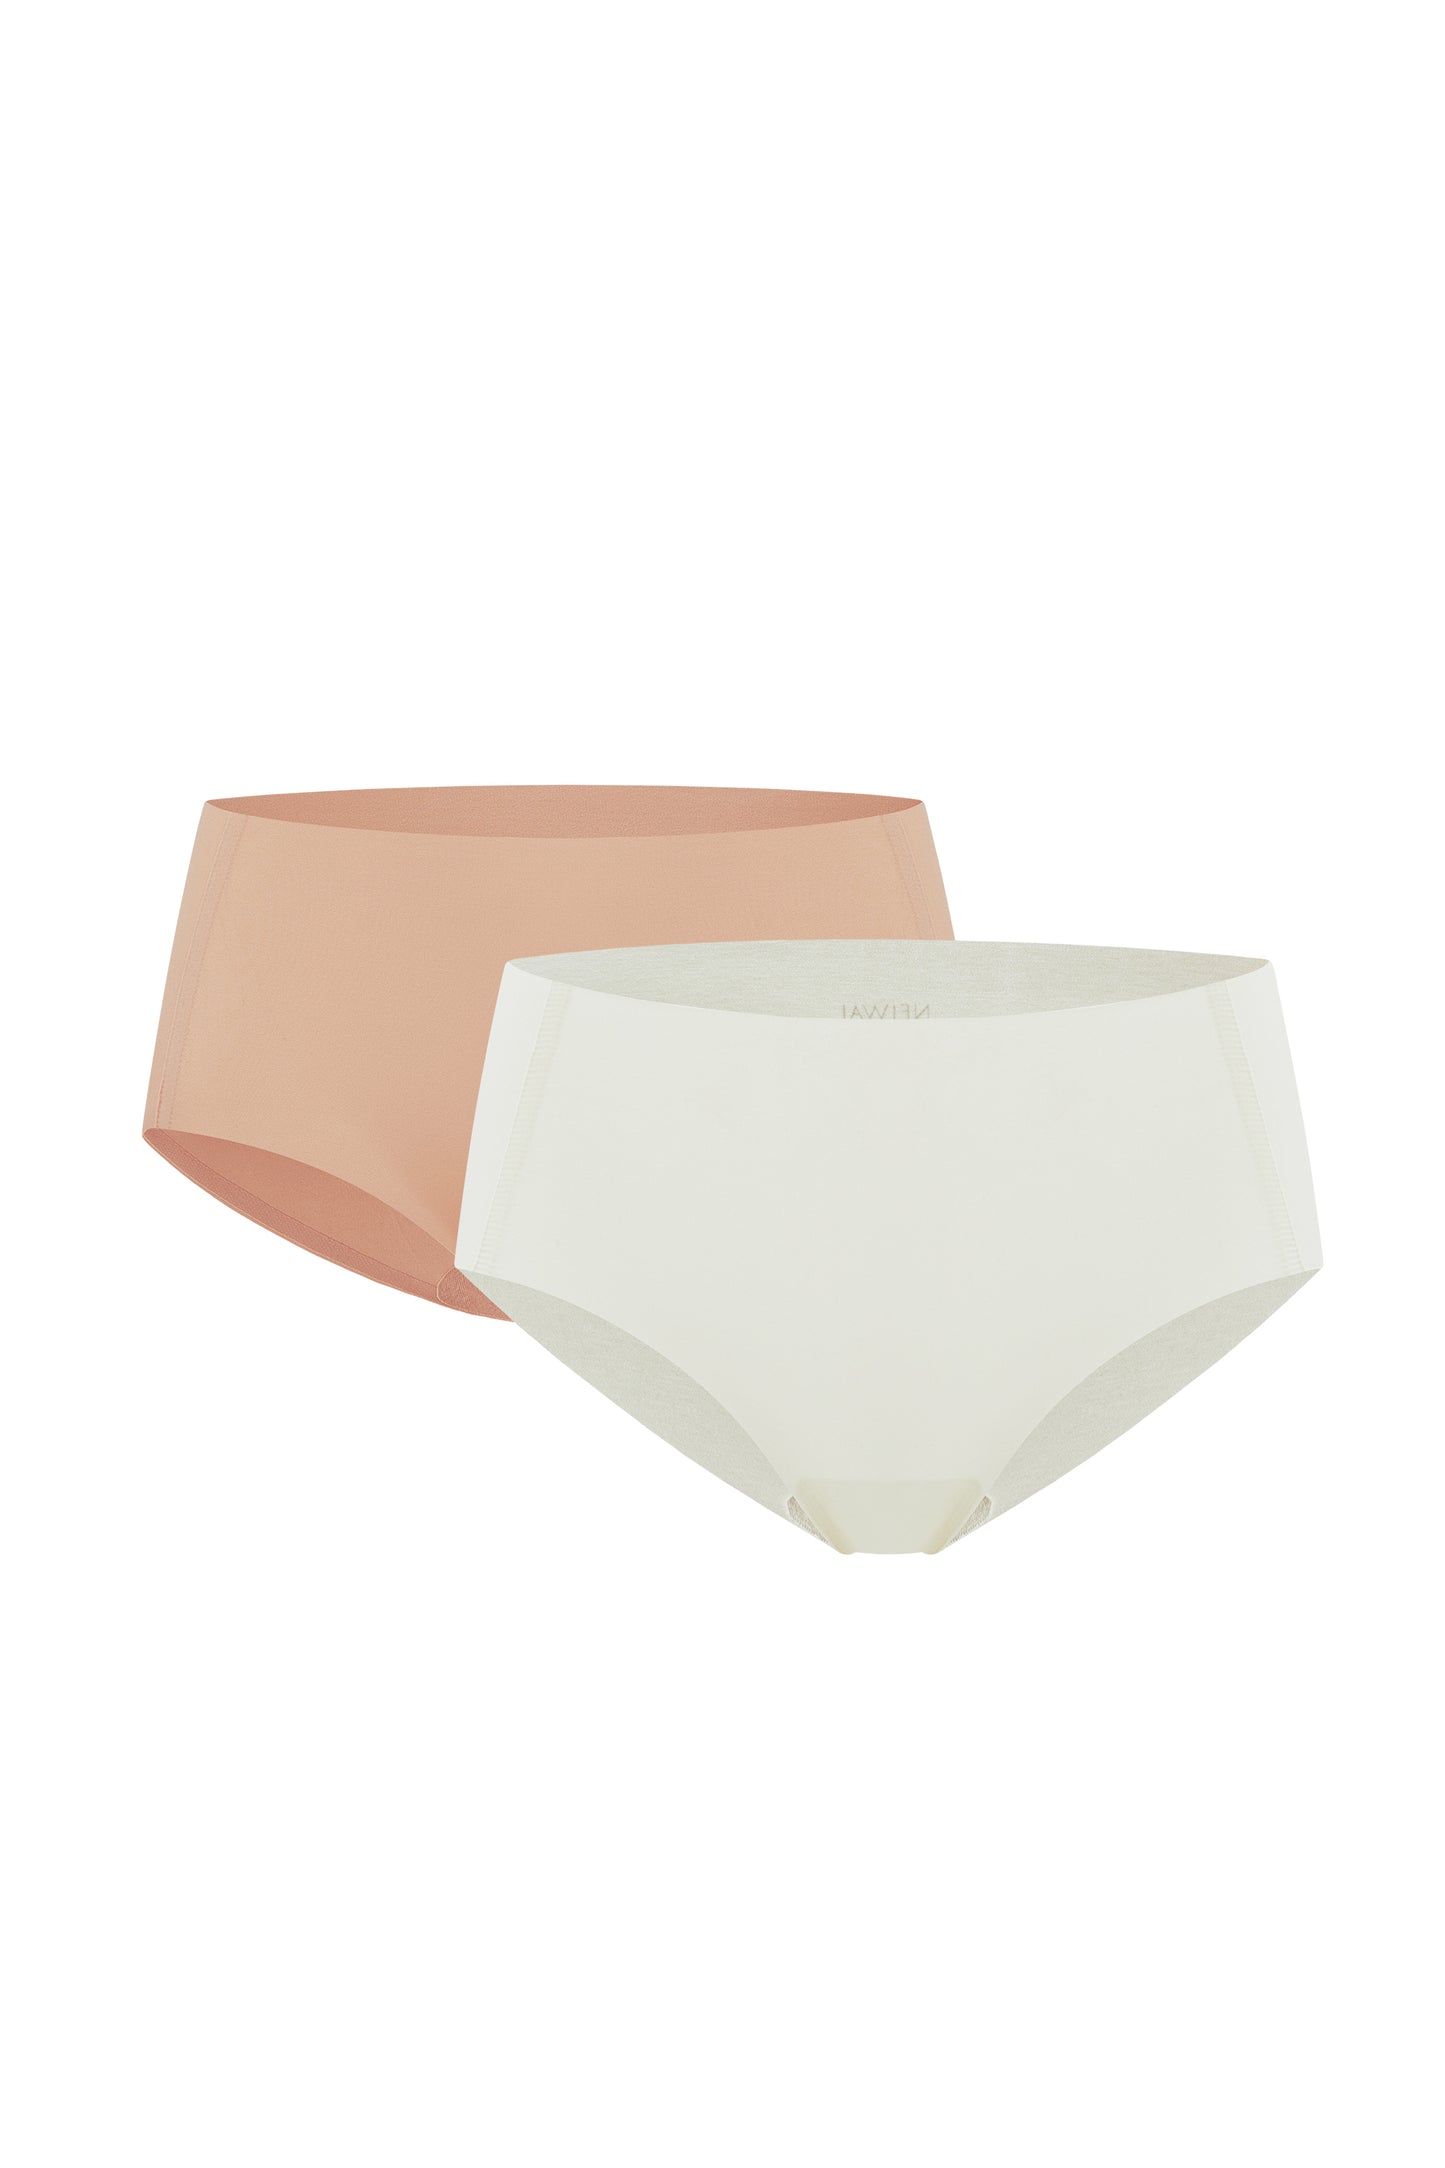 two briefs in beige and off white